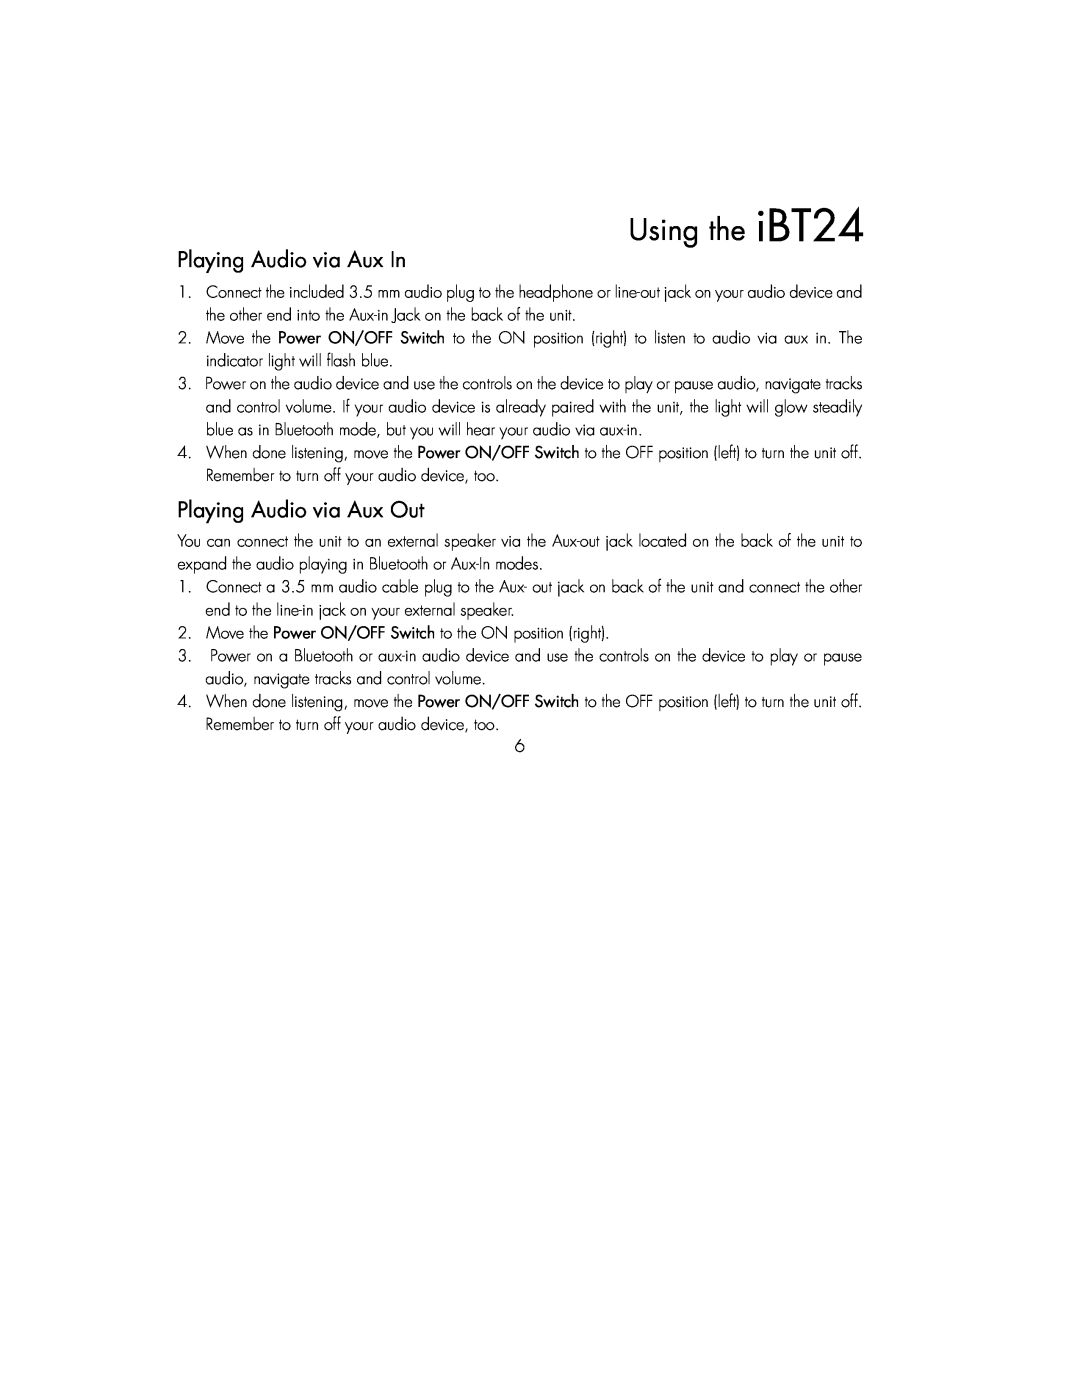 iHome IBT24GC, IBT24UC instruction manual Playing Audio via Aux In, Playing Audio via Aux Out, Using the iBT24 